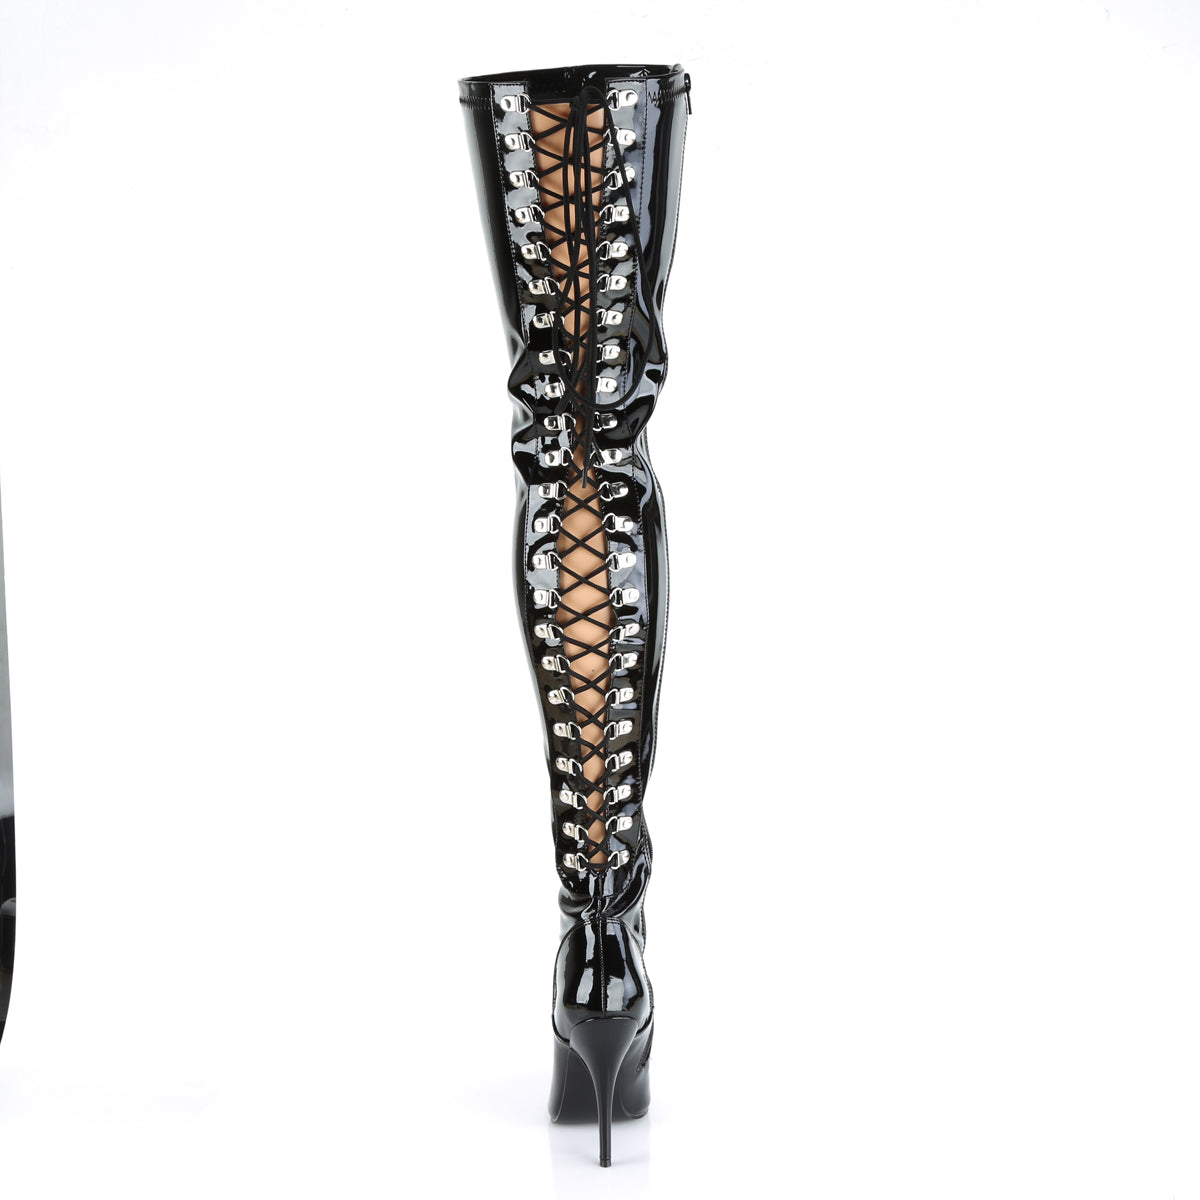 SEDUCE-3063 Lace Up Back Thigh High Boots